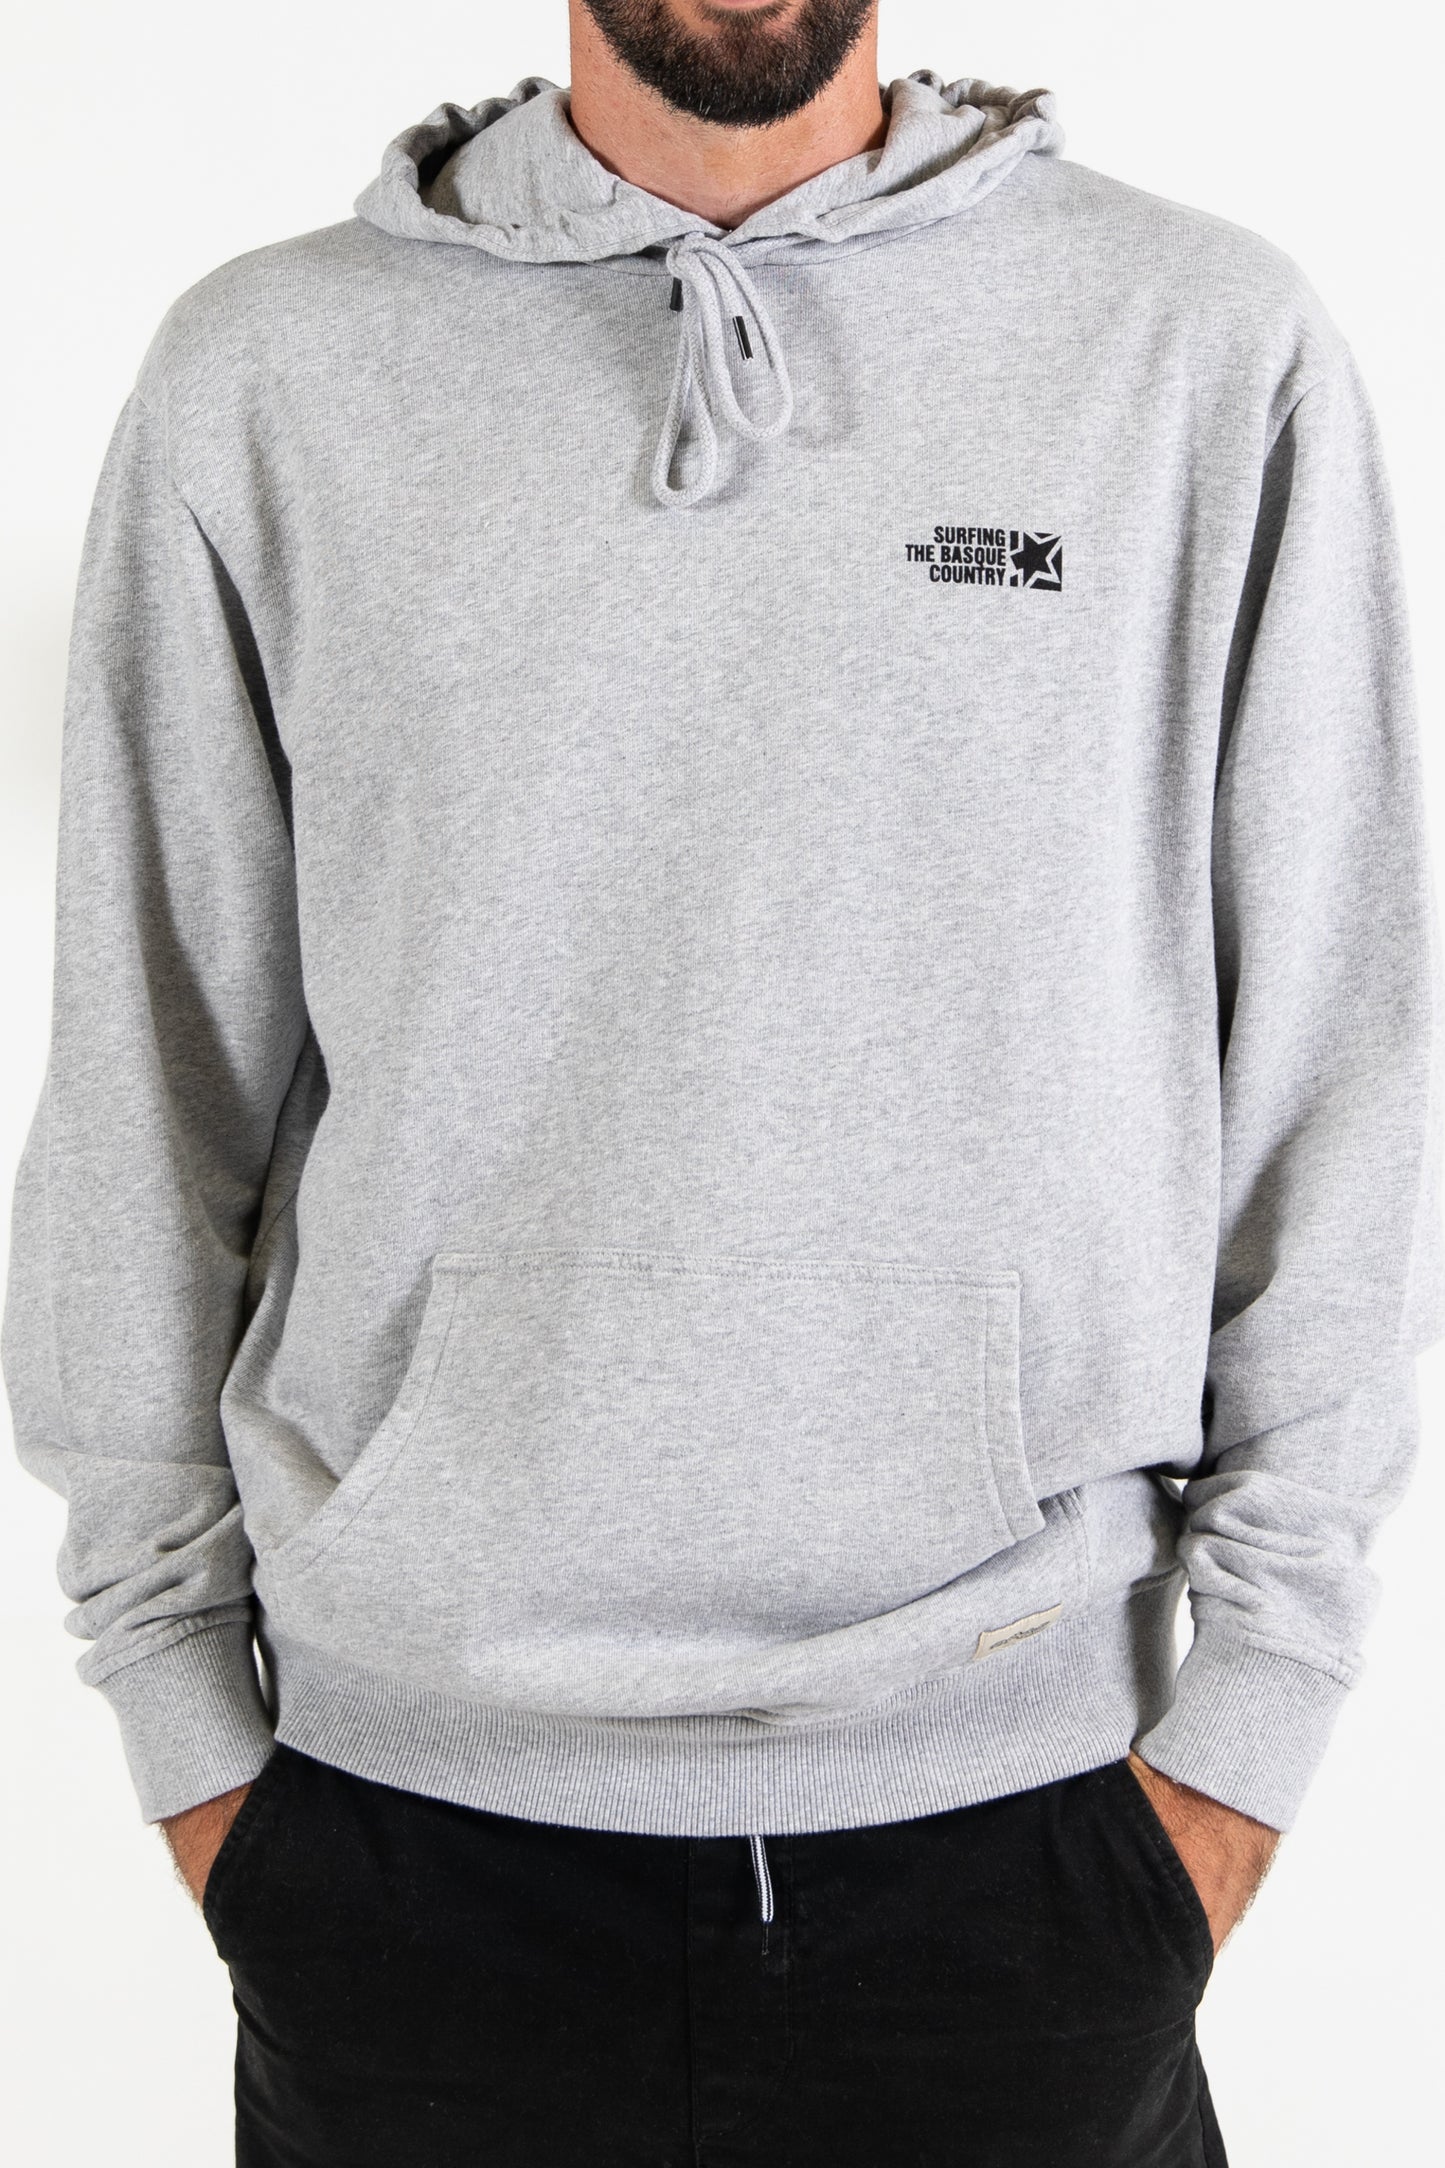 
                  
                        Pukas-Surf-Shop-Surfing-the-basque-country-man-hoodie-grey
                  
                